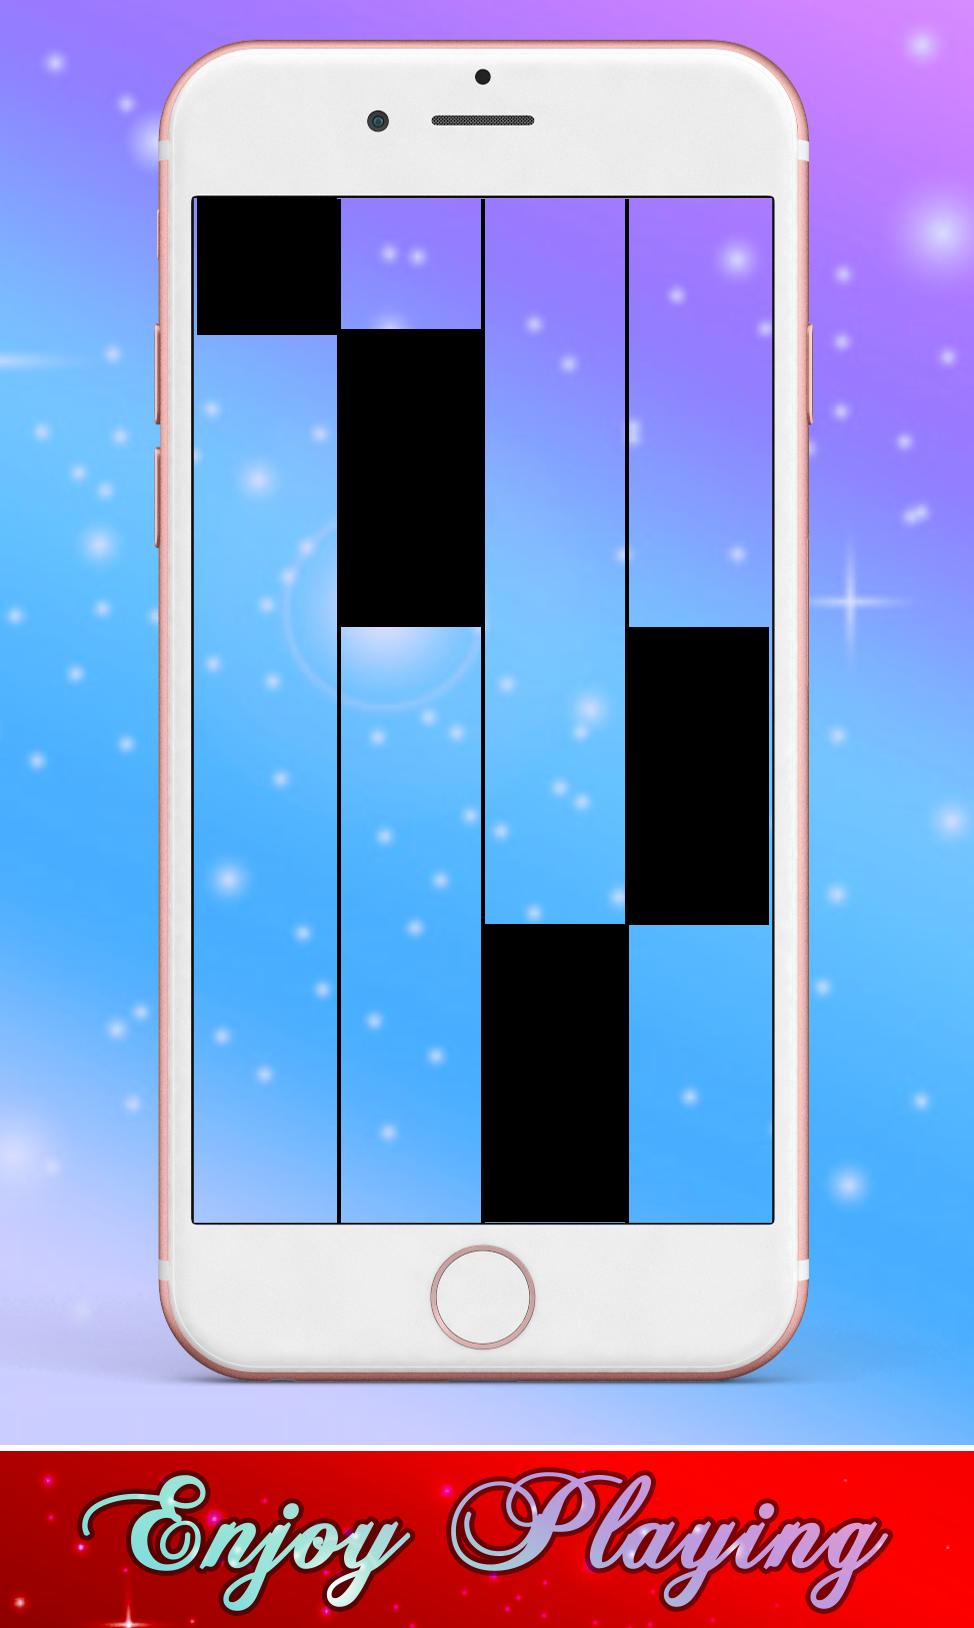 High Hopes Panic At The Disco Piano Black Tiles For Android Apk